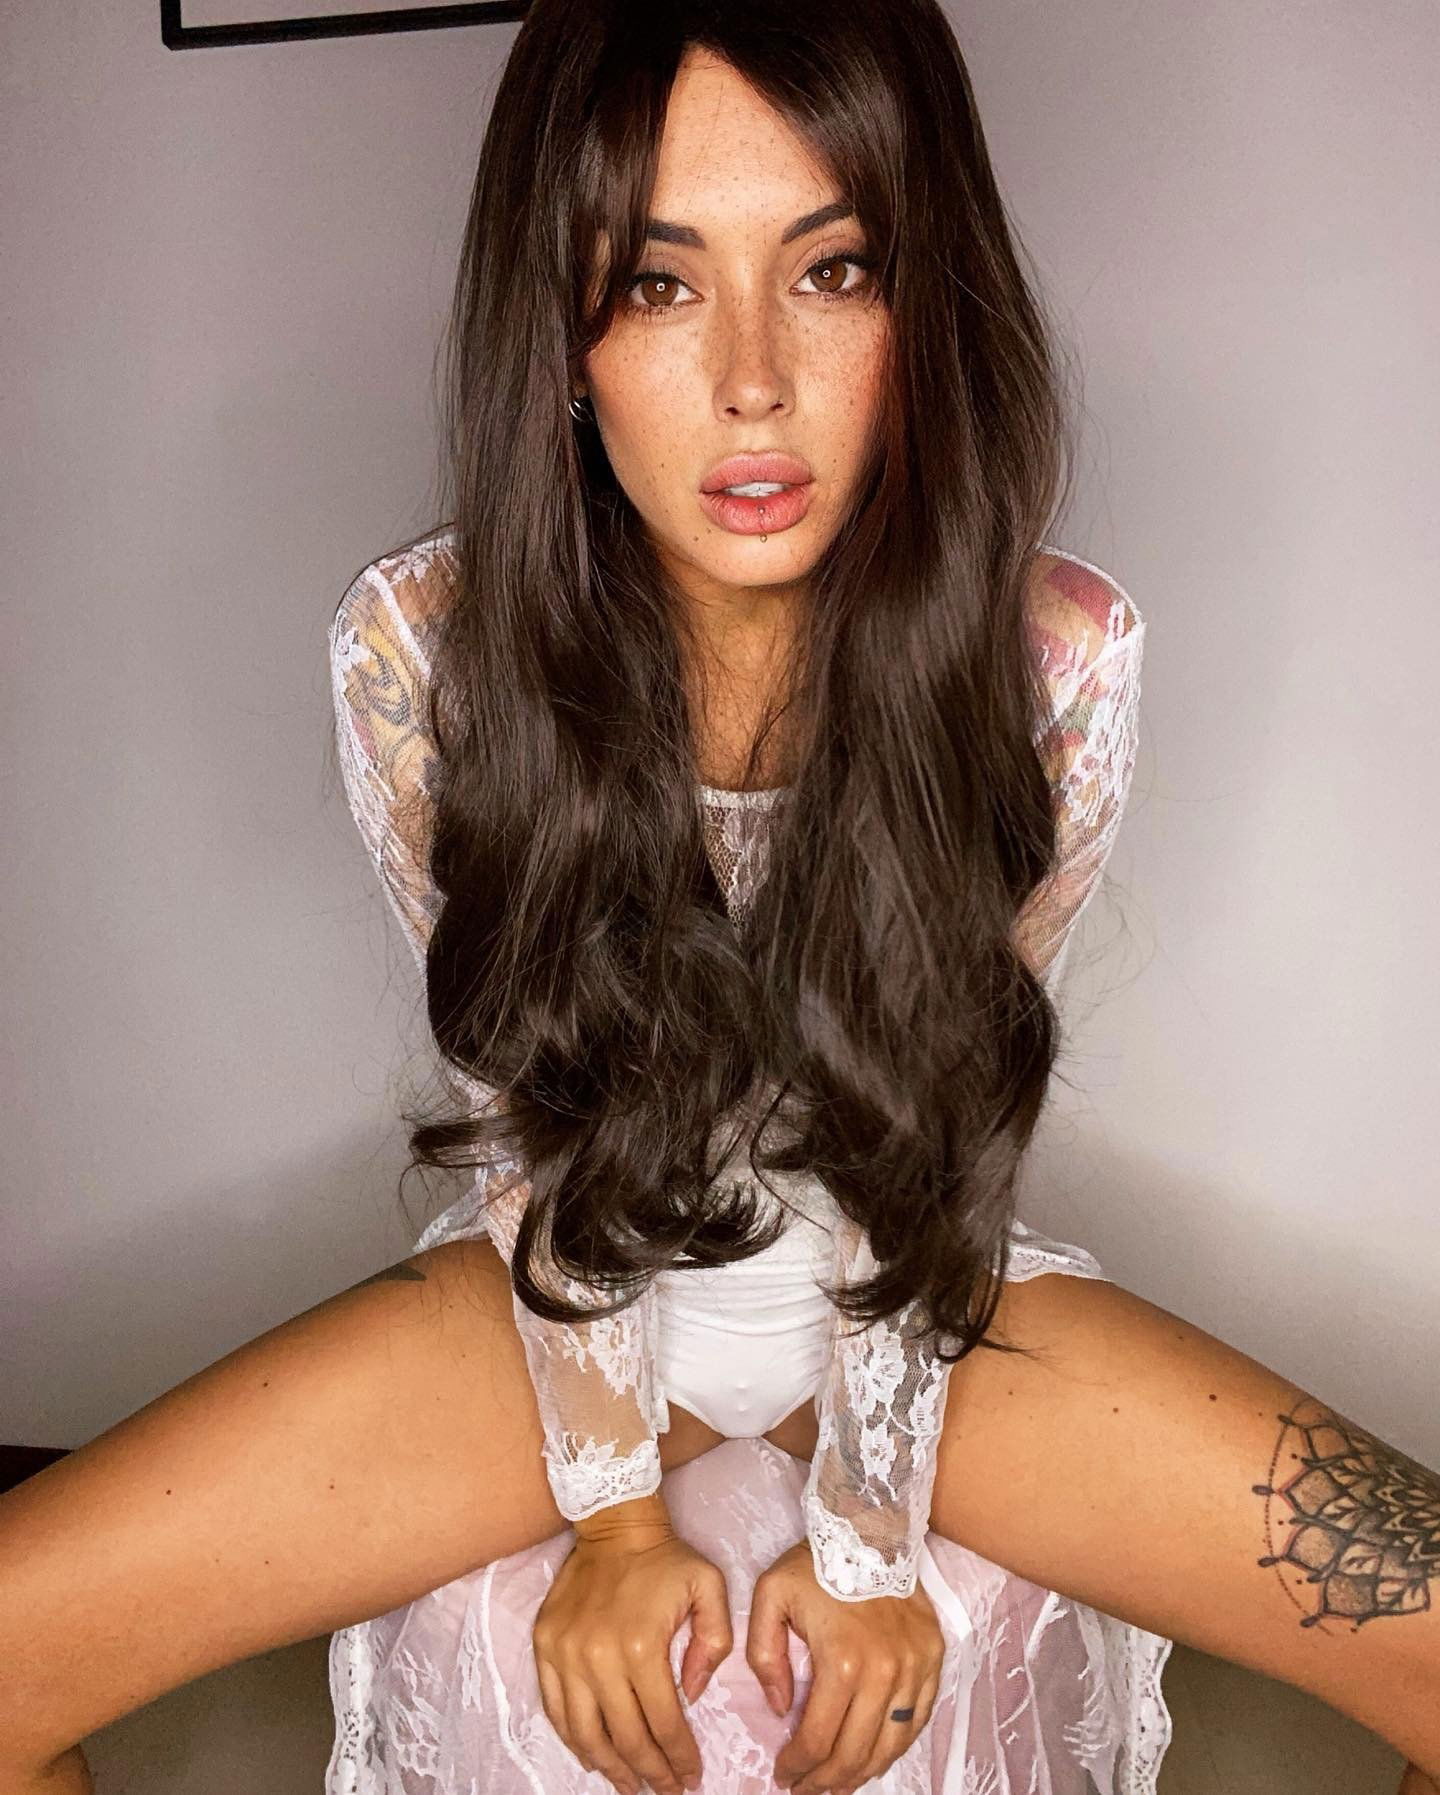 Photo by Devynsdogg with the username @Devynsdogg,  December 2, 2021 at 9:20 PM. The post is about the topic Tattoo and the text says 'What a hottie! #brunettebeauties #inkedwomen #babes #sexyfemales #sexylingerie #giwtf #college'